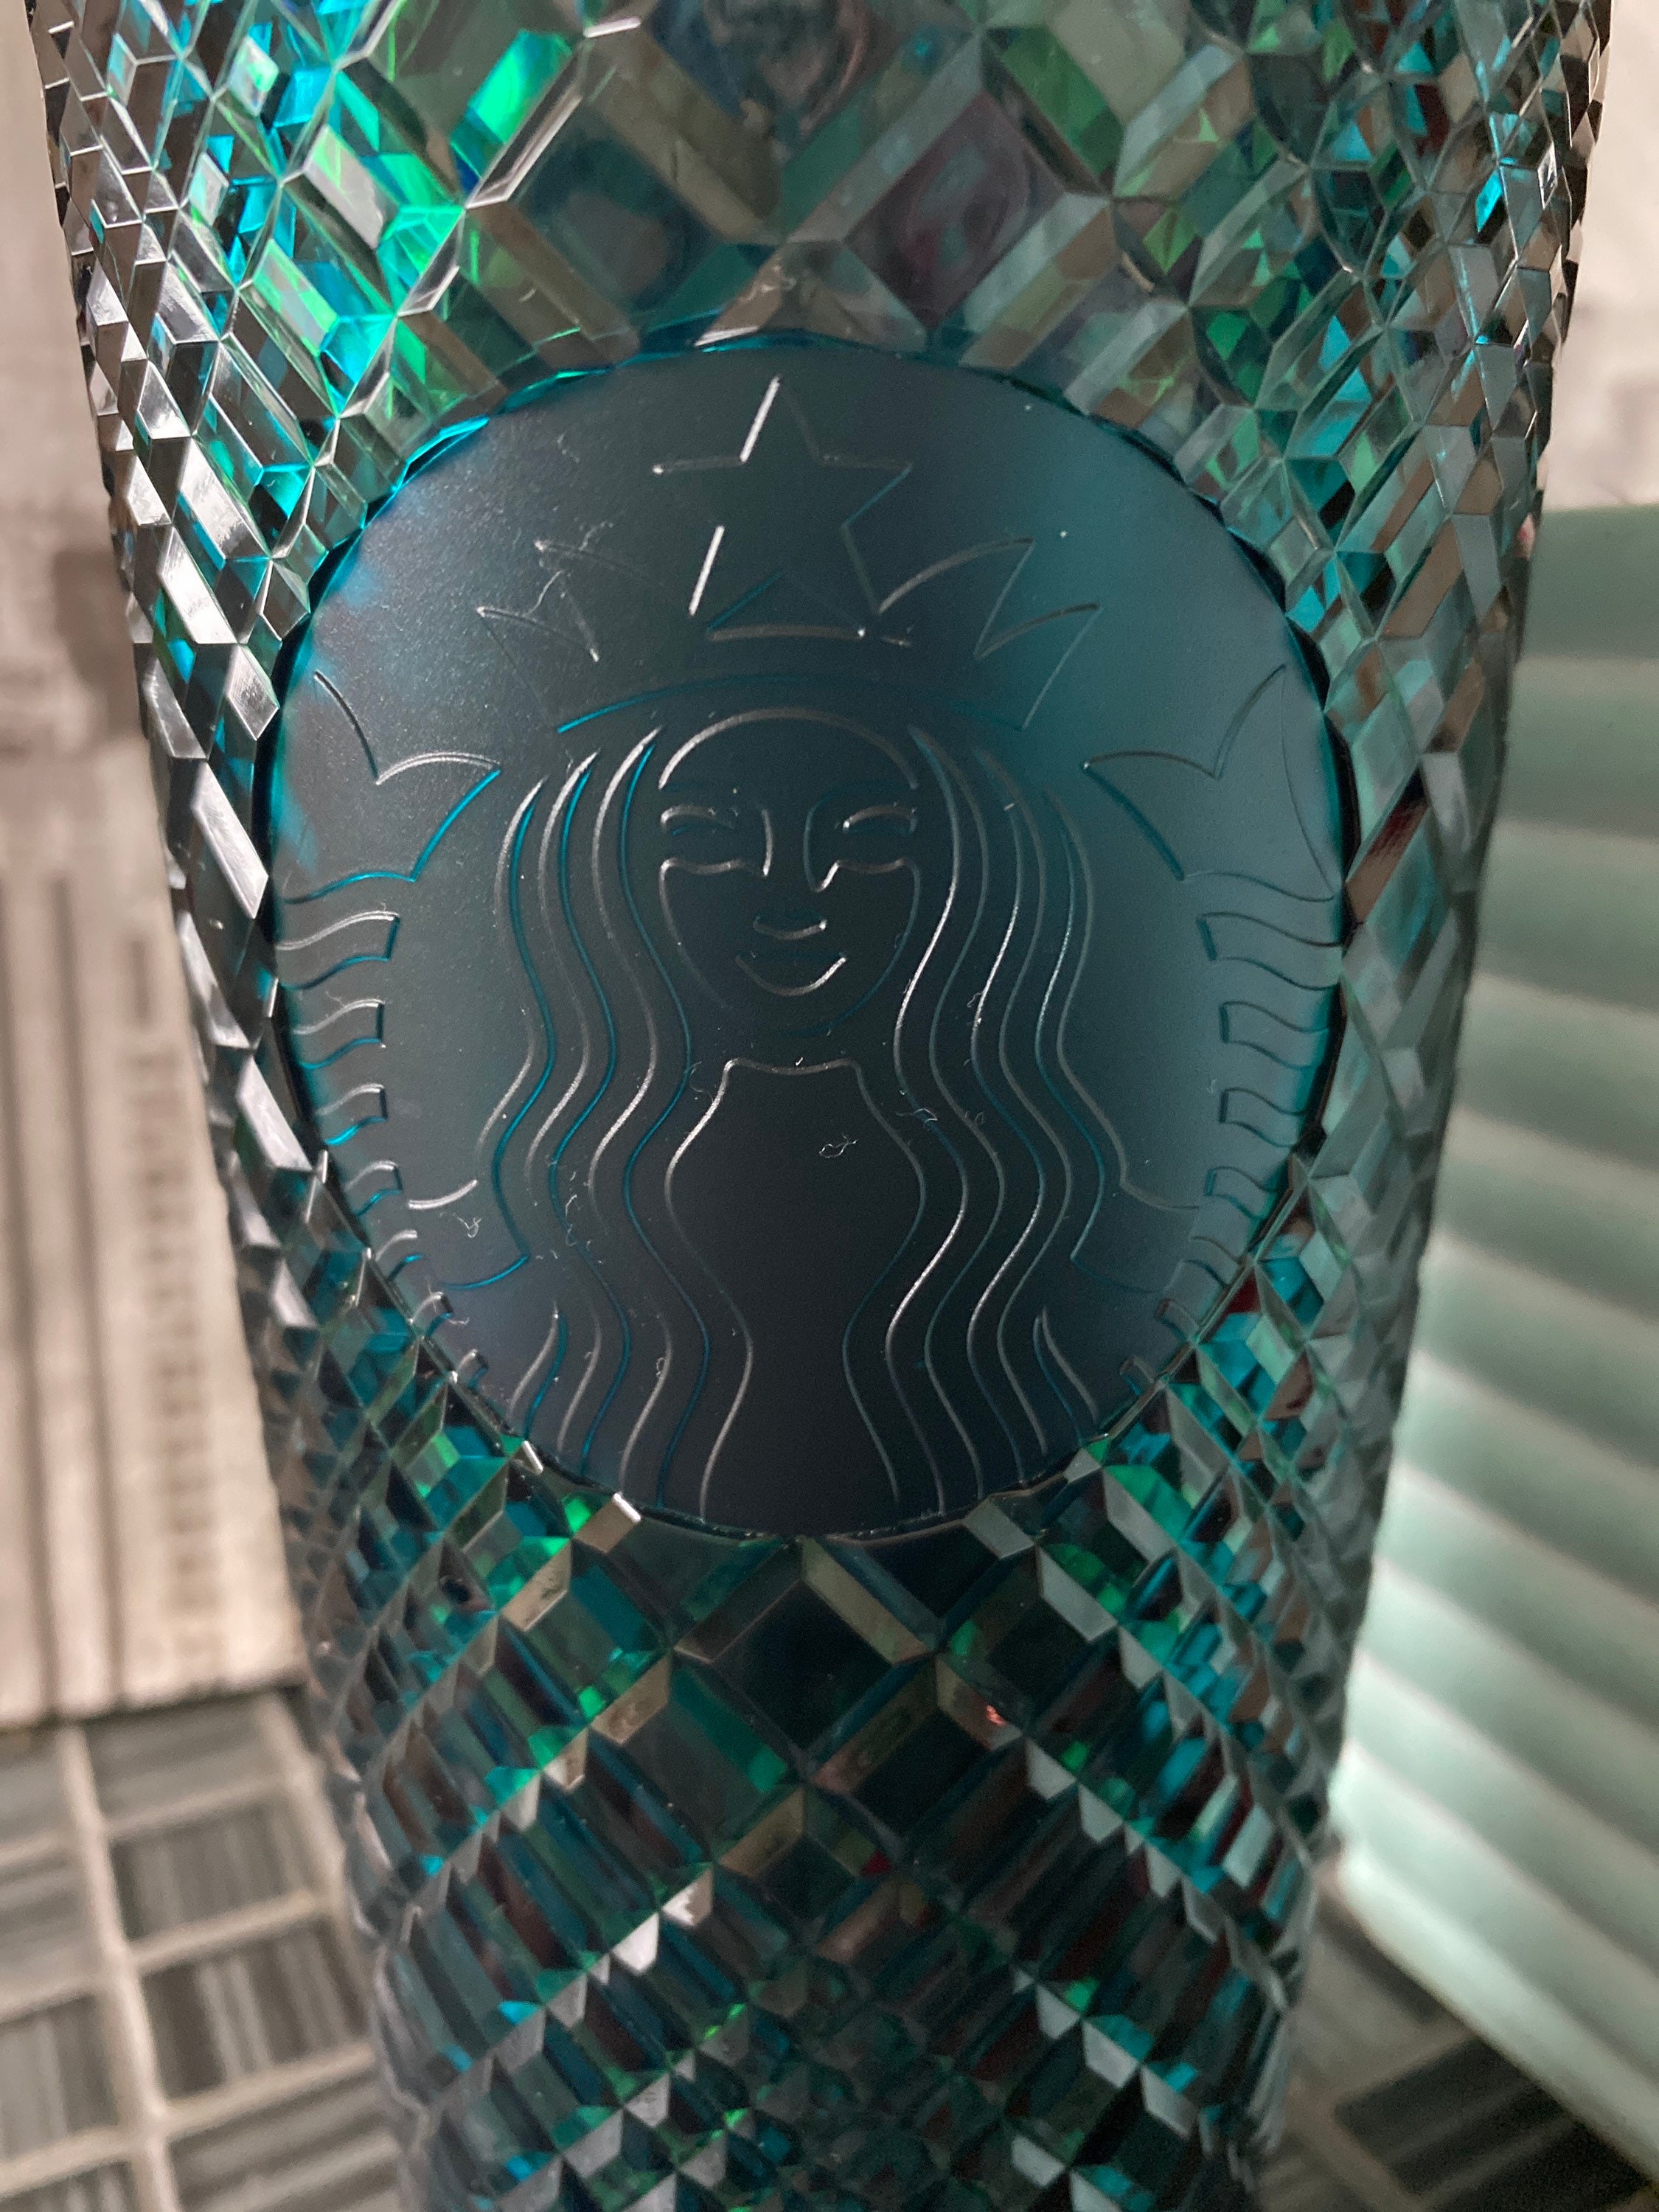 See Starbucks's New Jeweled Cold Cups For the 2021 Holidays